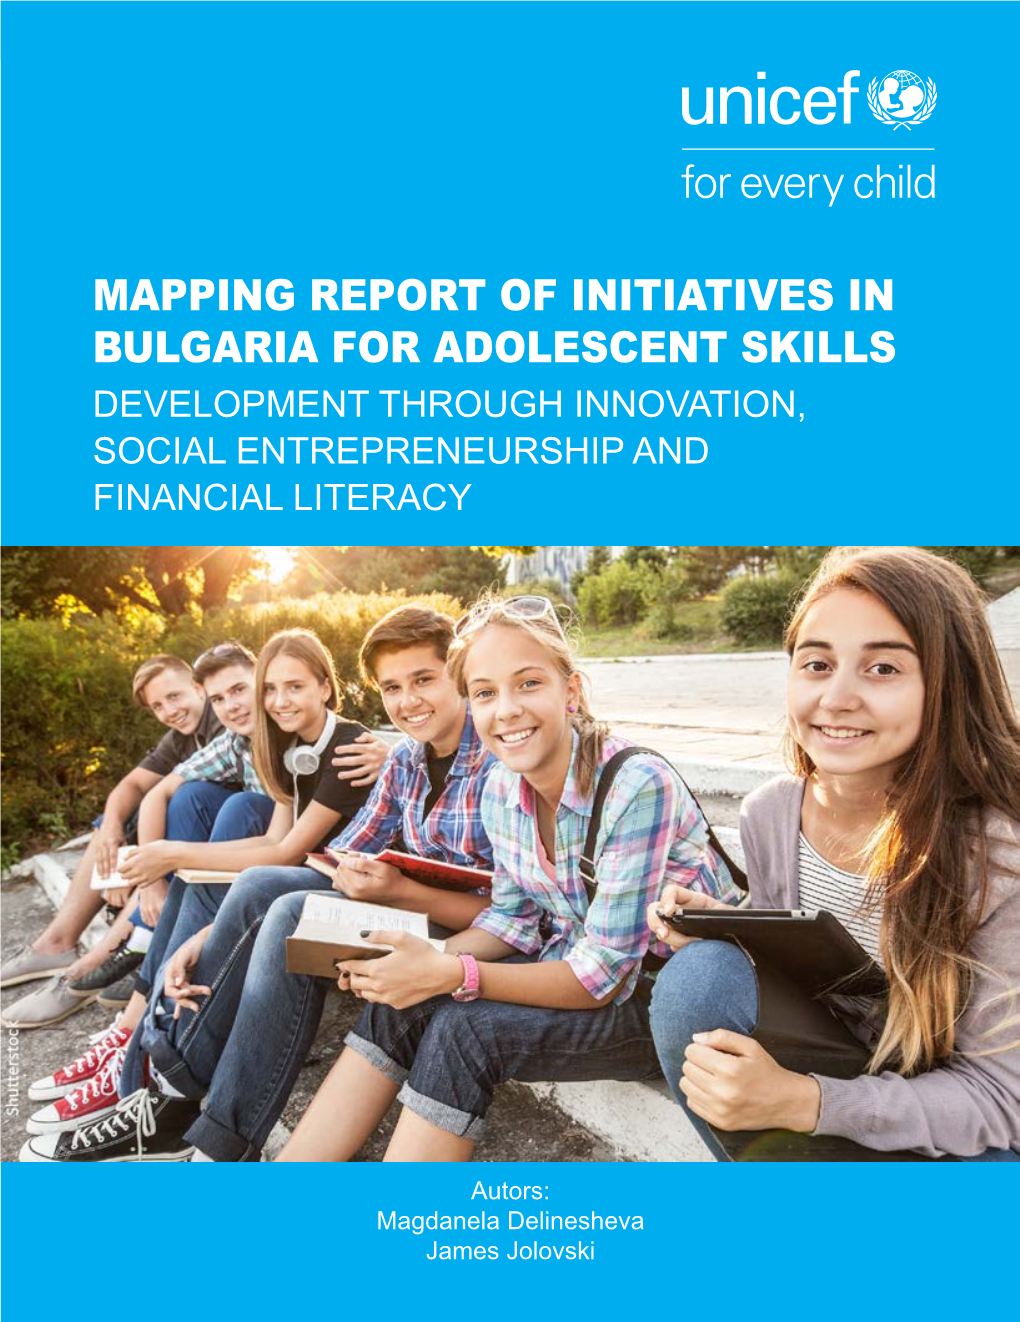 Mapping Report of Initiatives in Bulgaria for Adolescent Skills Development Through Innovation, Social Entrepreneurship and Financial Literacy